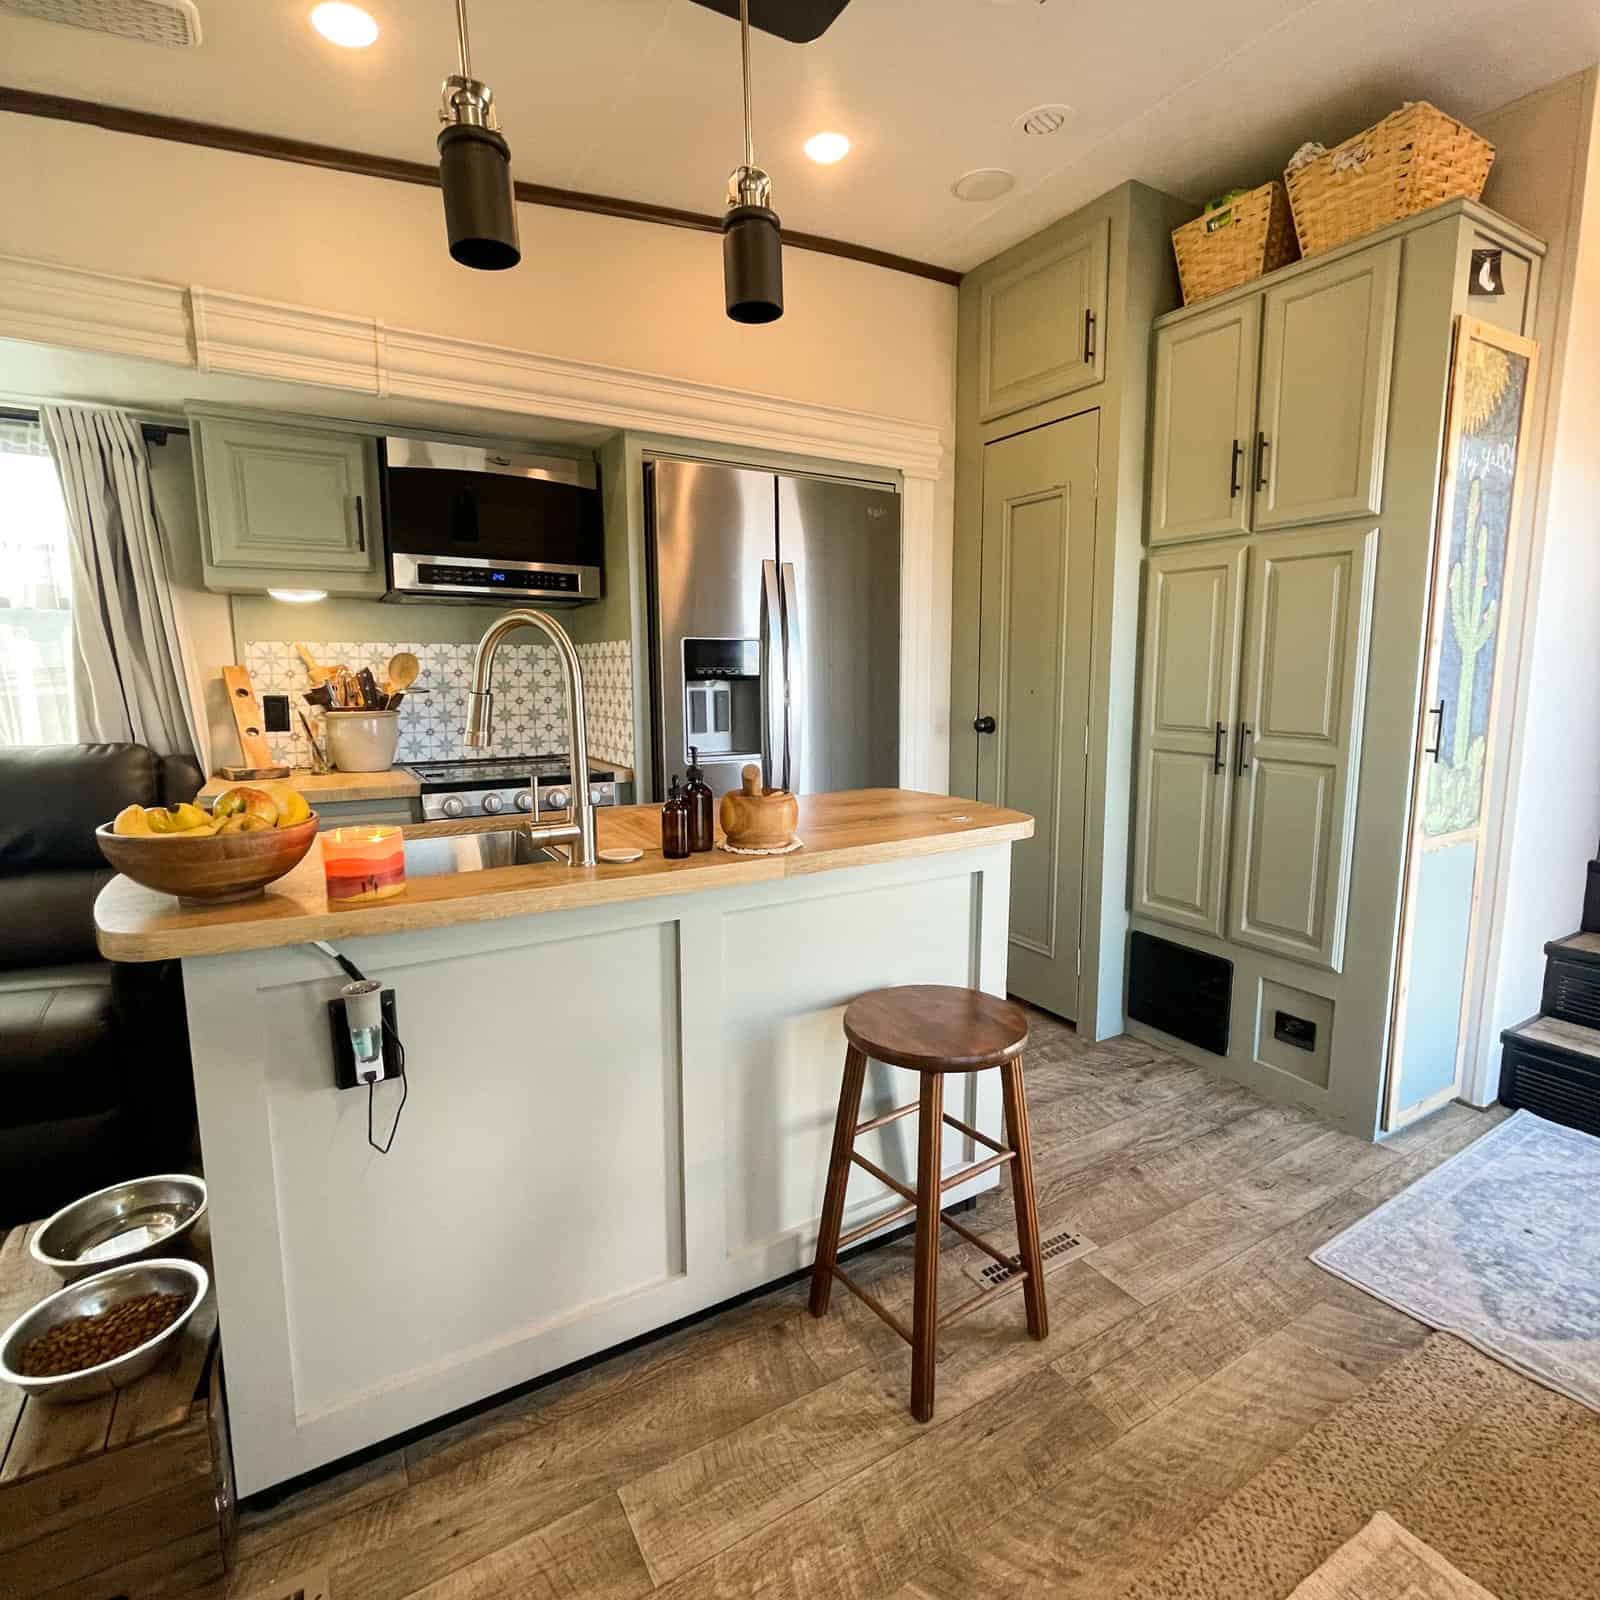 The renovated kitchen in the 2019 Jayco Eagle fifth wheel. (Image: Maggie Matlock)
